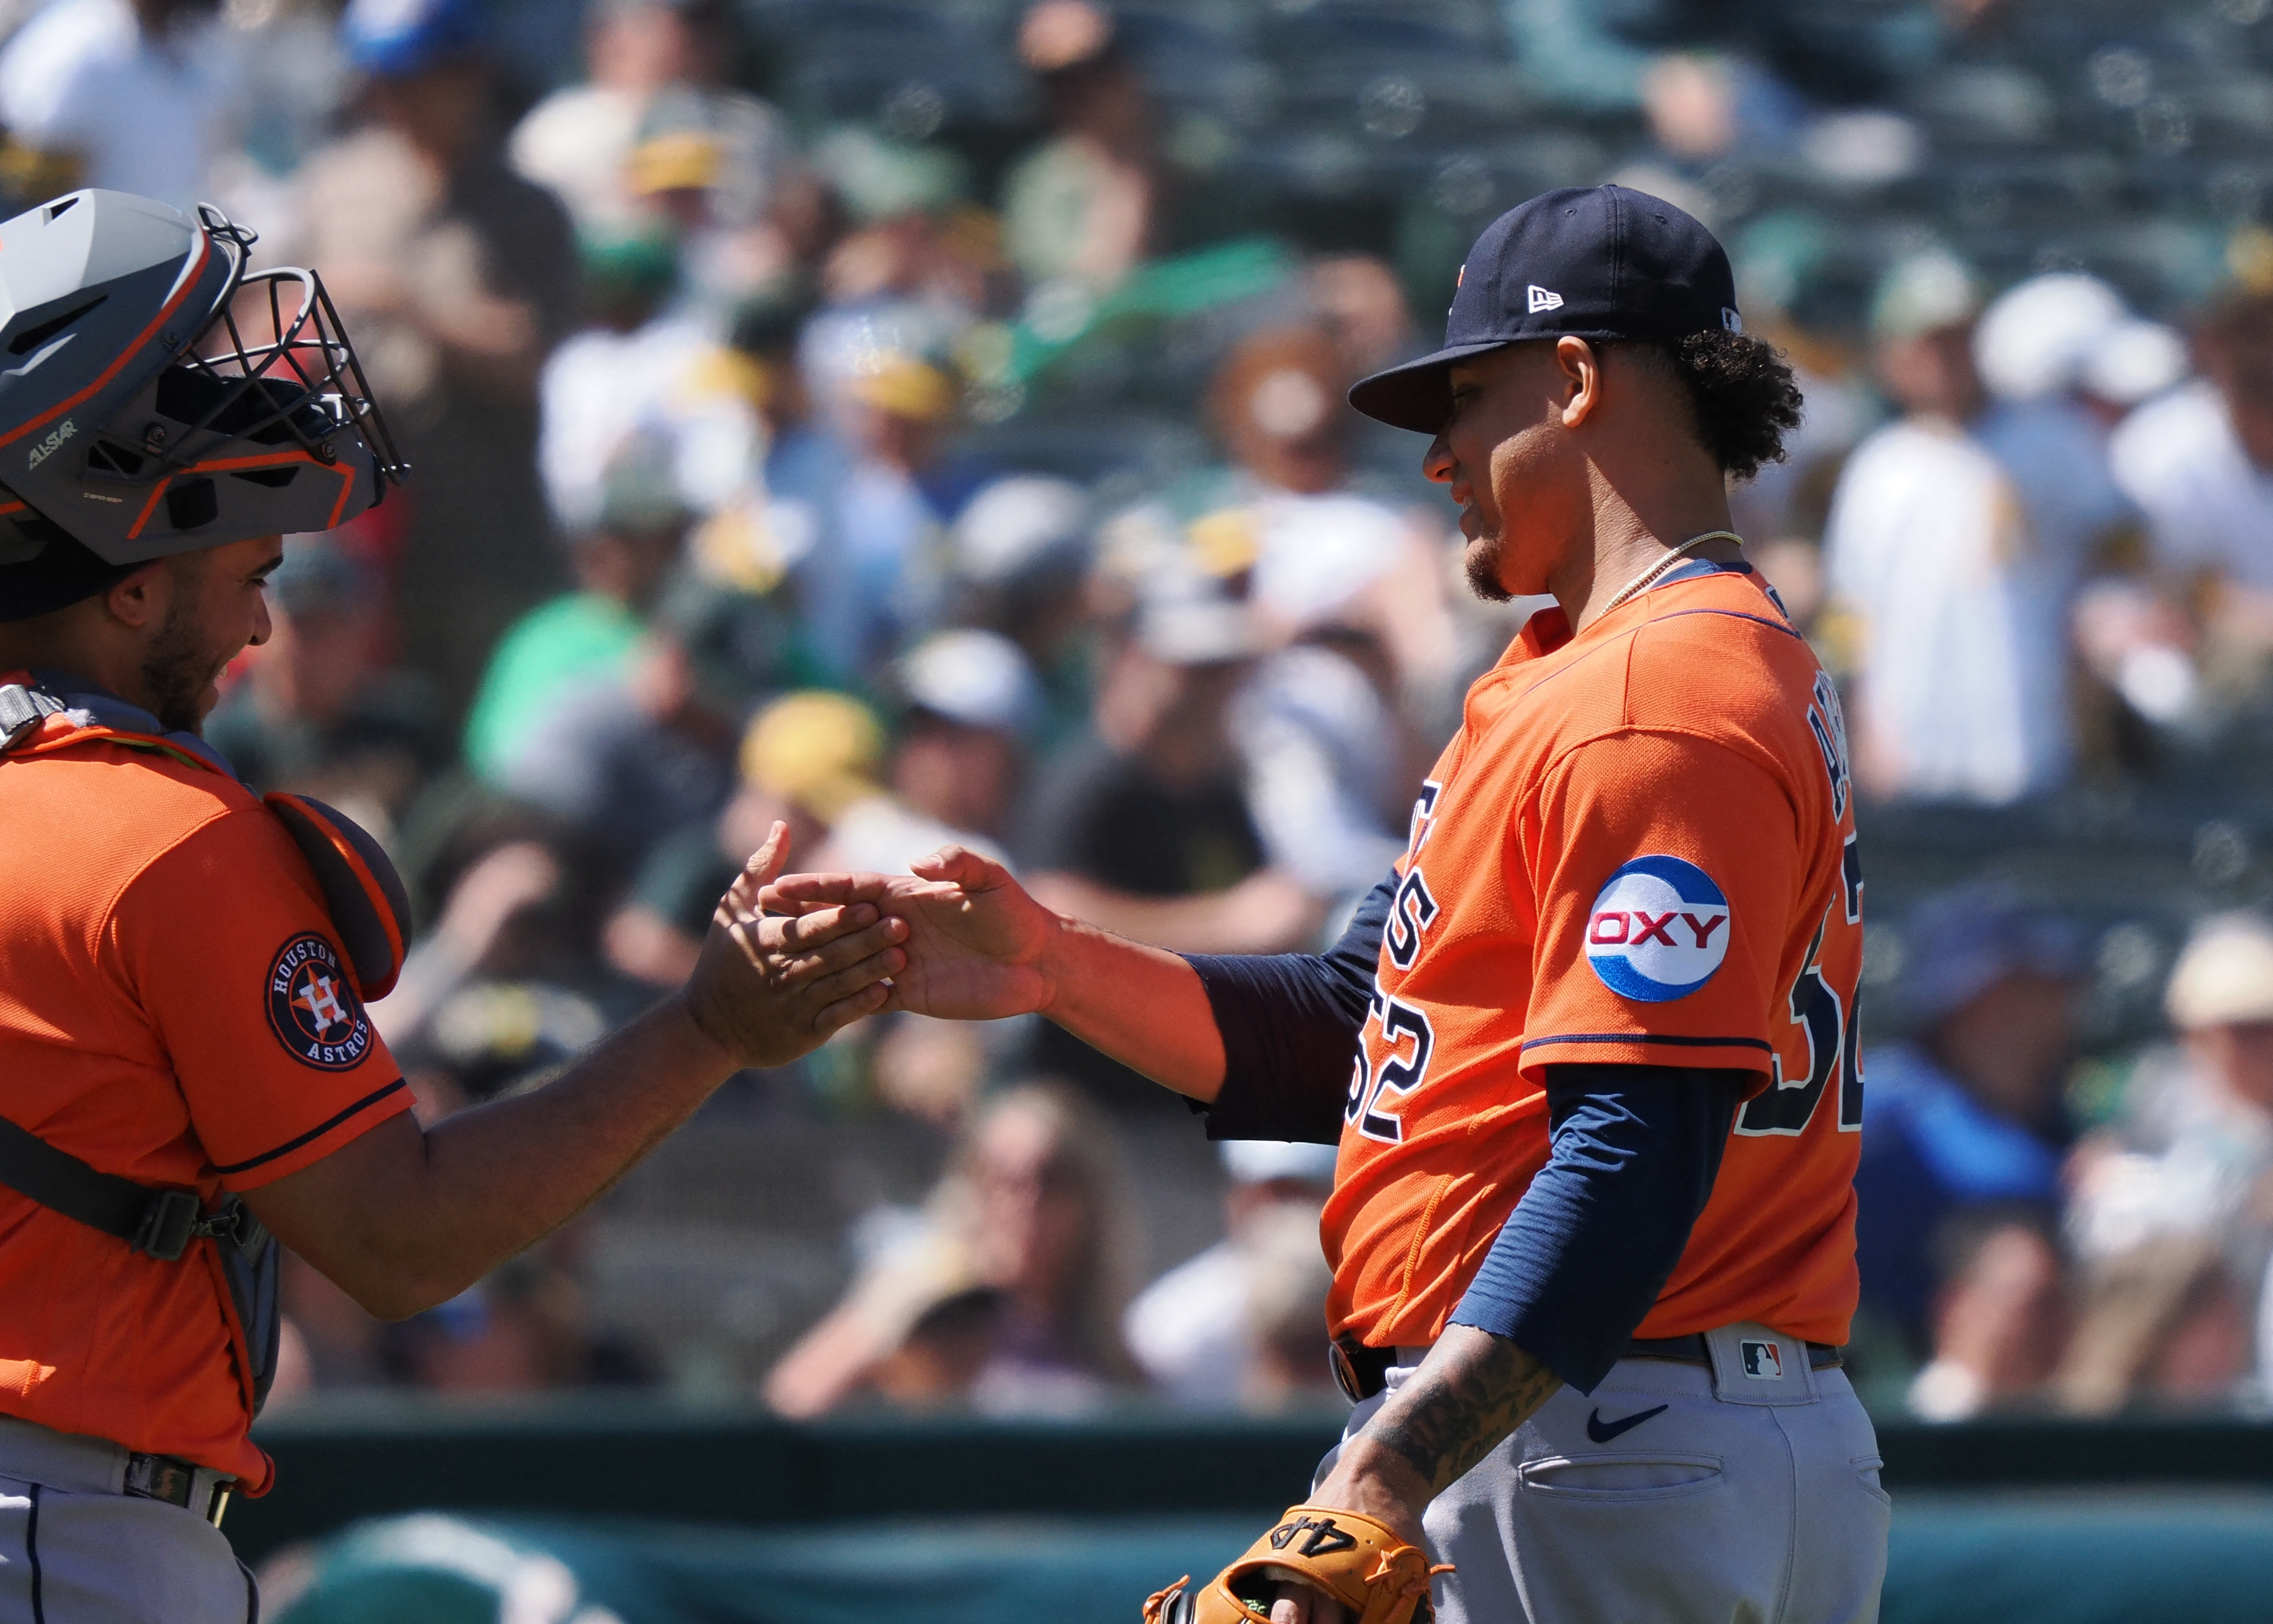 Mauricio Dubón's homer in the ninth inning lifts Astros past A's 3-2